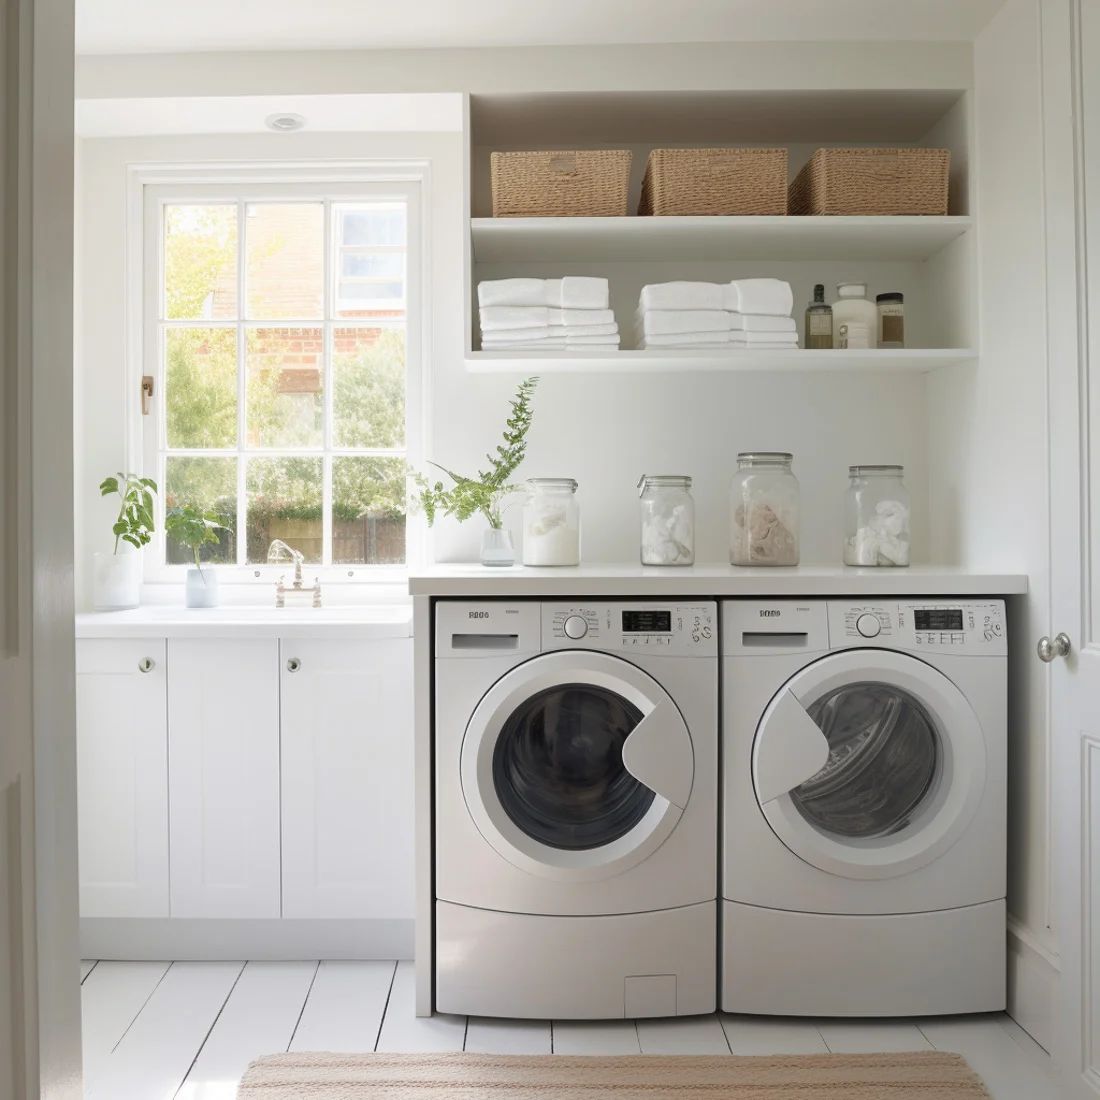 white laundry room with open shelving ideas, laundry baskets, towels, and glass jar organizers above washer and dryer